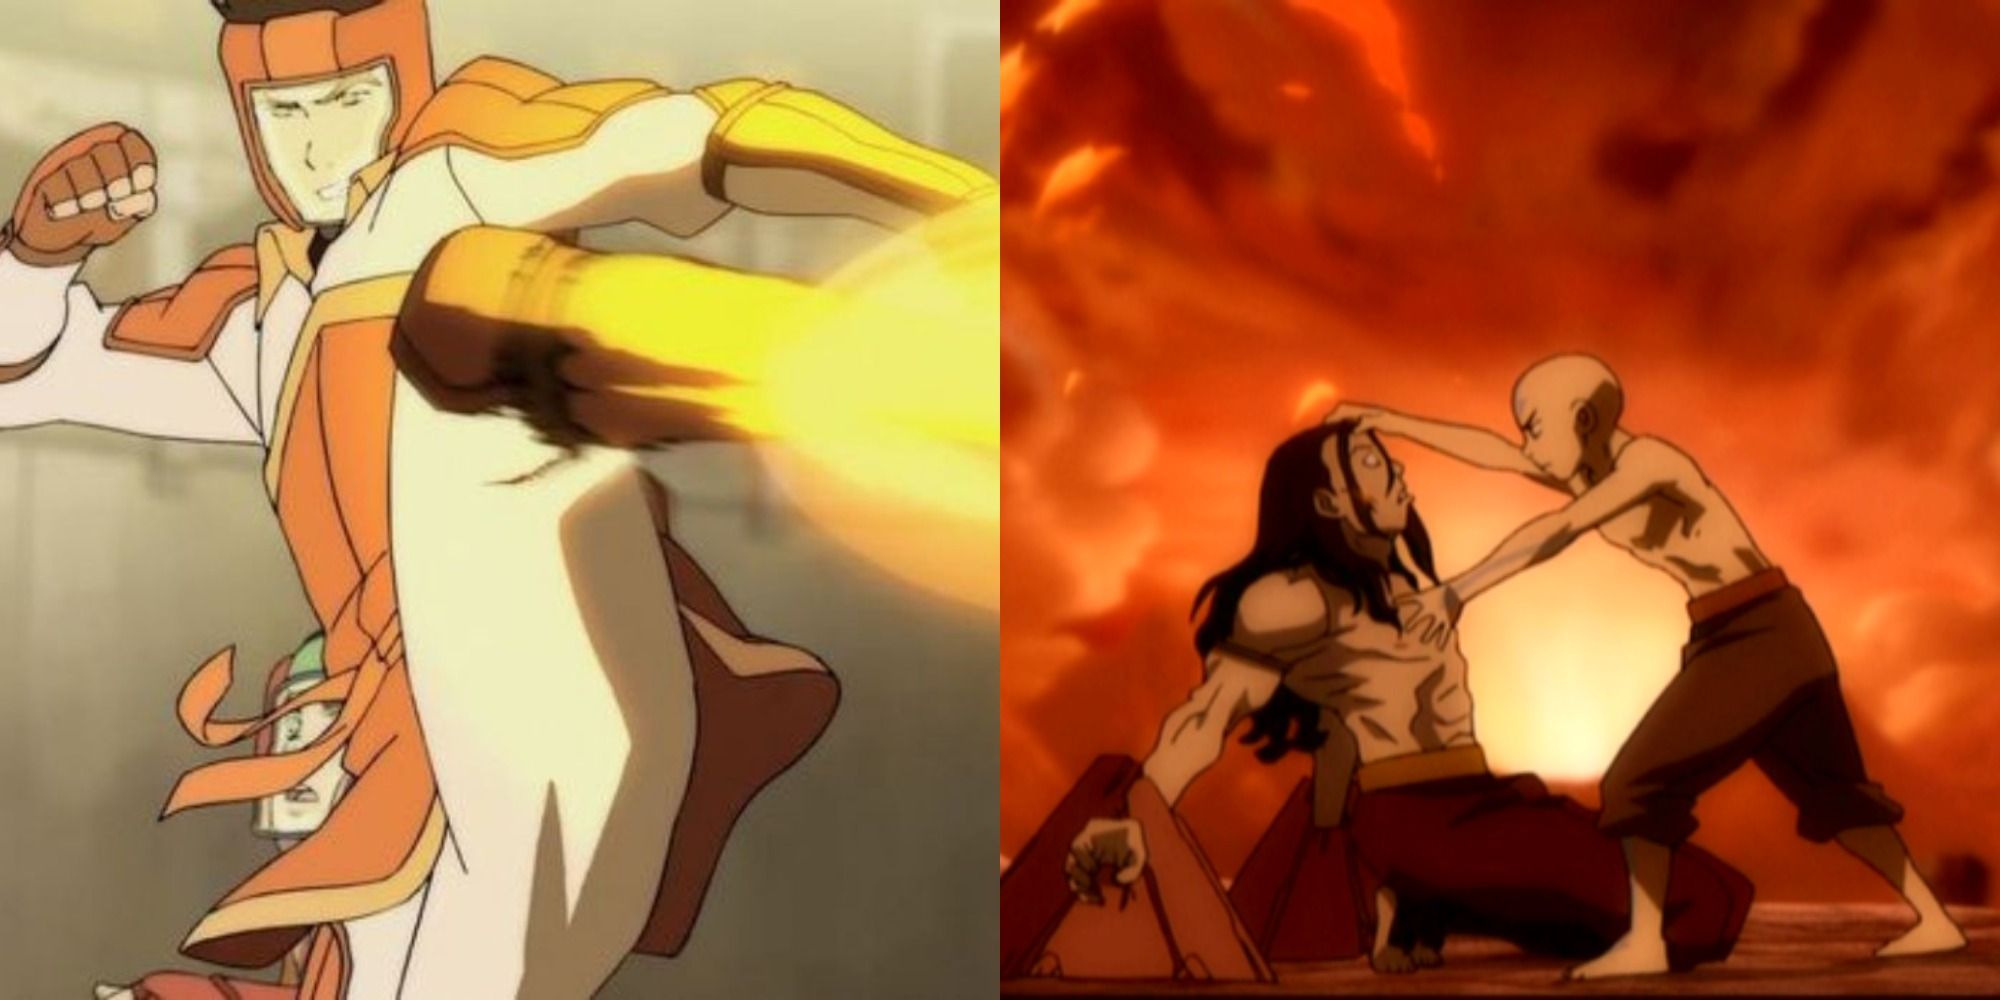 Two side by side images from Avatar the Last Airbender with Mako and Aang vs Ozai.